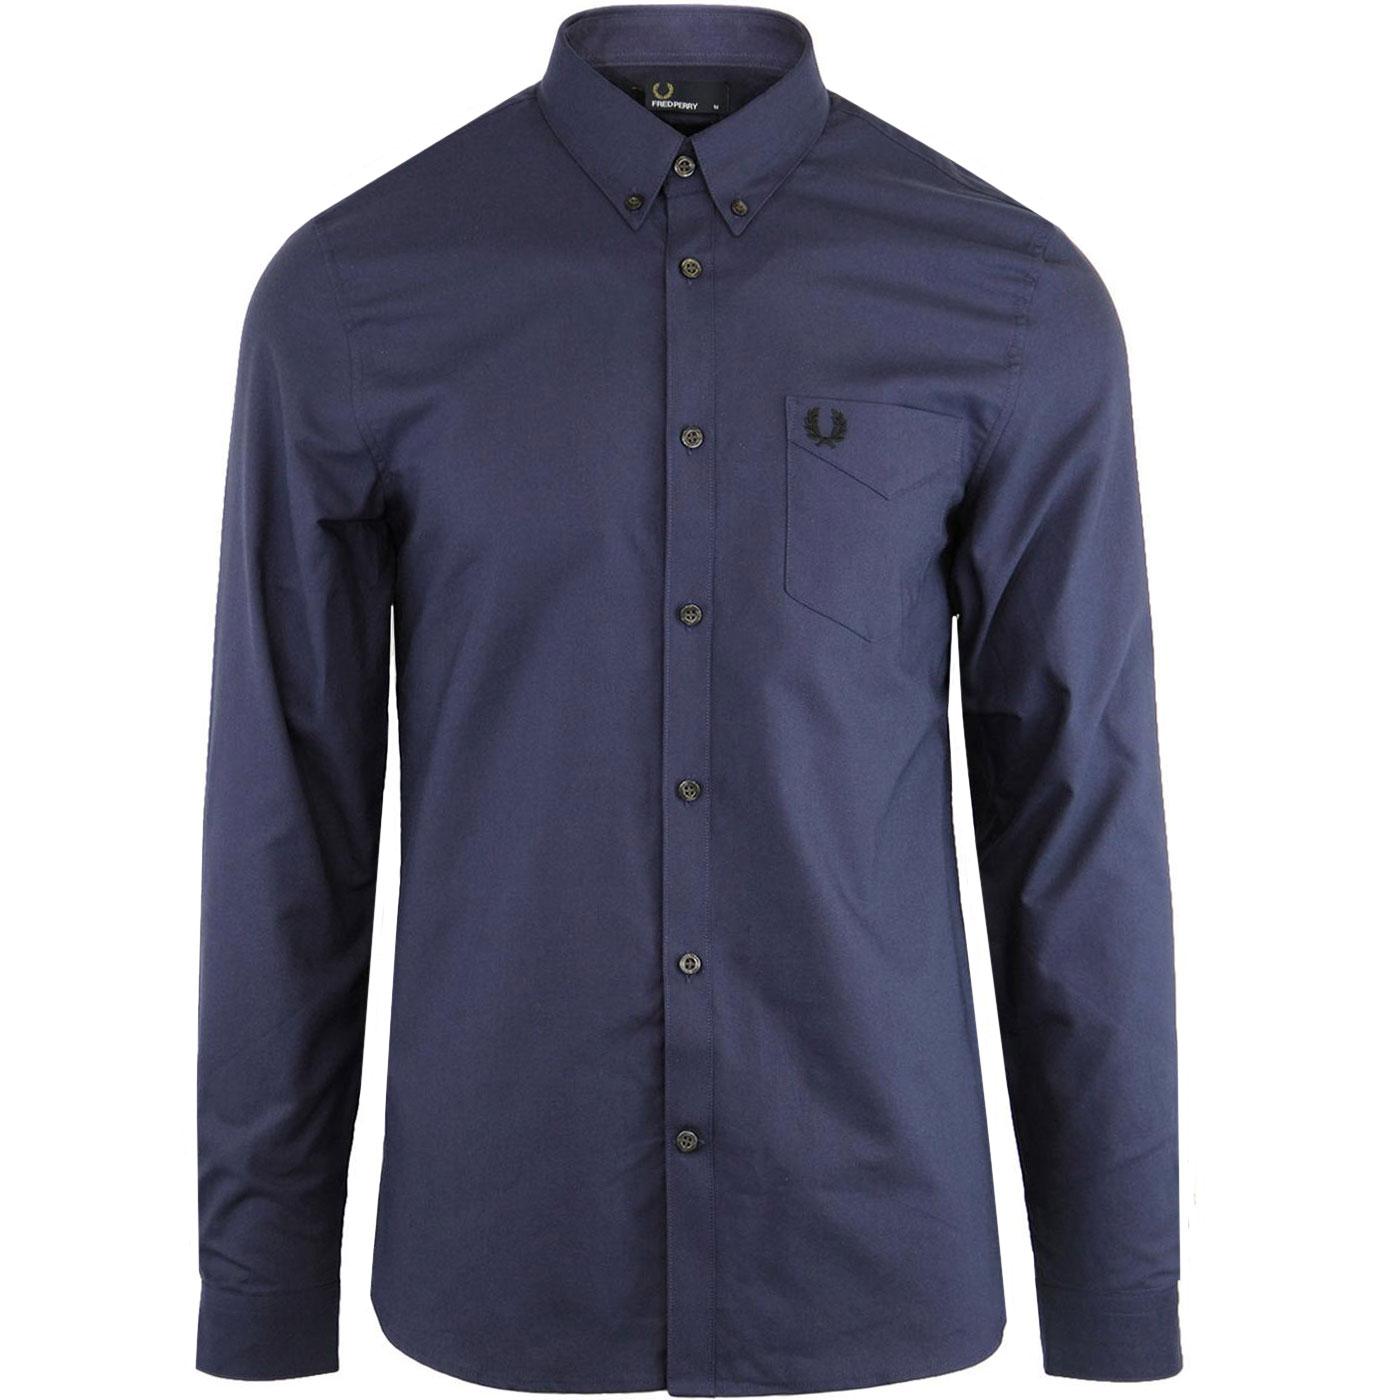 FRED PERRY Men's Classic Mod 60s Oxford Shirt Victoria Blue